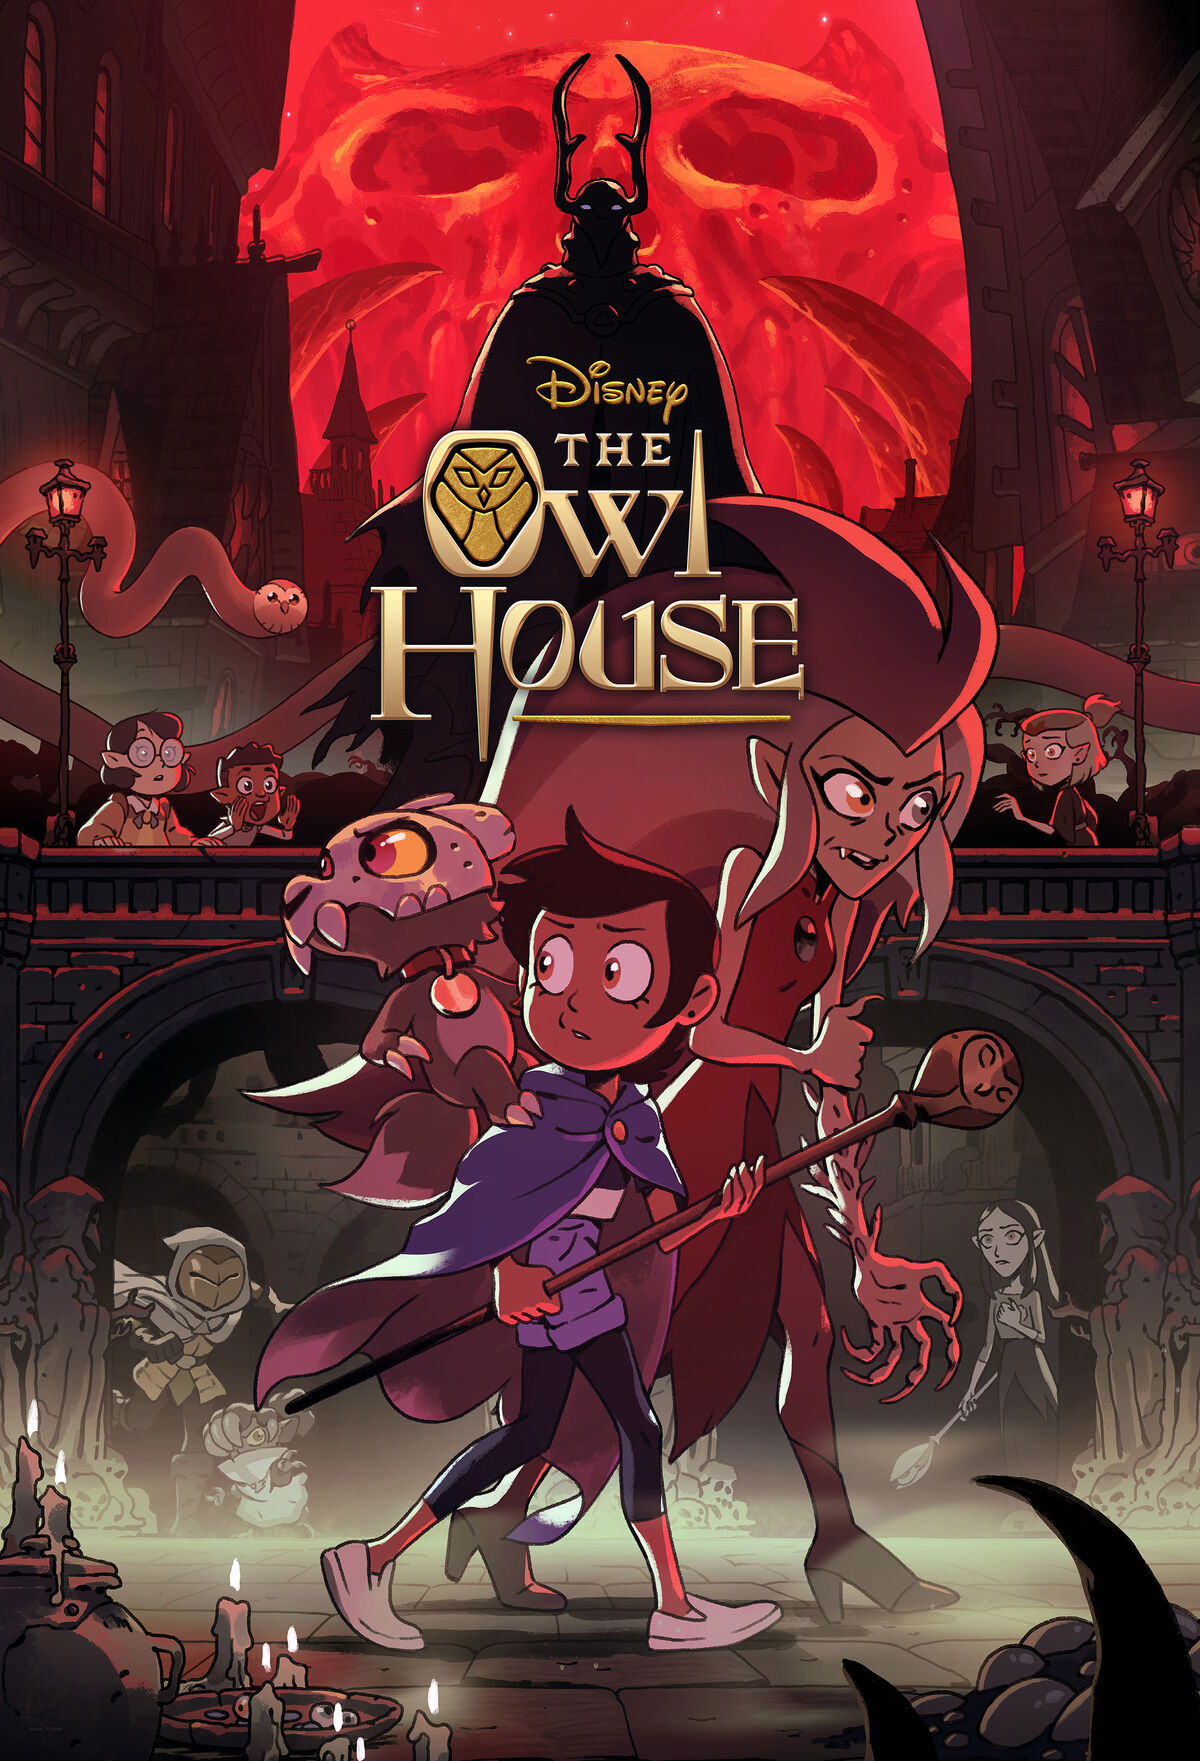 The Owl House Season 3 Episode 2 Premiere Special, For the Future, Trailer